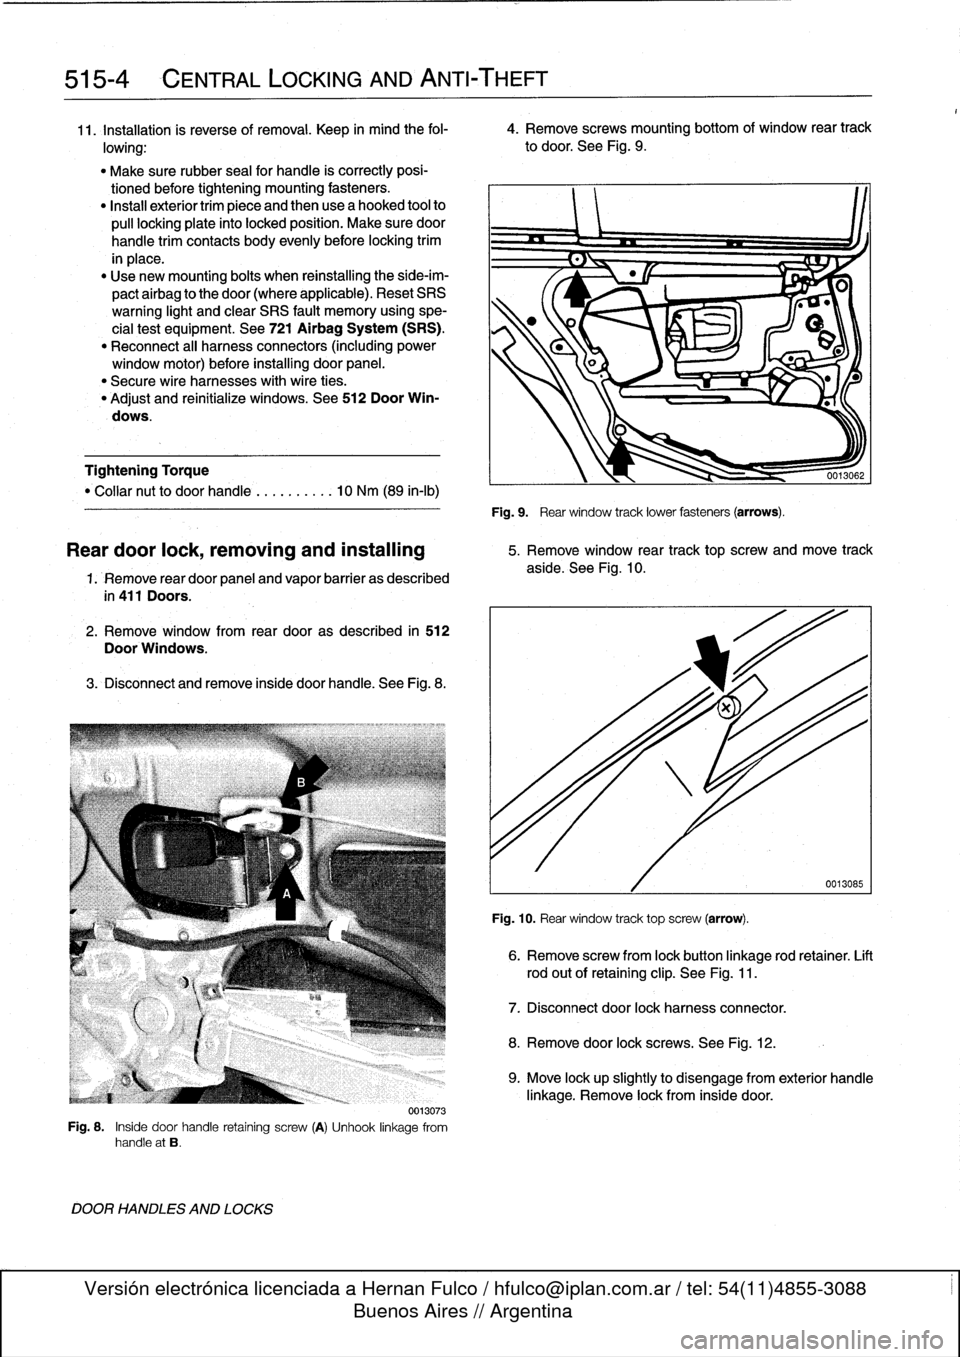 BMW 318i 1998 E36 Owners Manual 
515-4

	

CENTRAL
LOCKING
AND
ANTI-THEFT

11
.
Installation
is
reverse
of
removal
.
Keep
in
mind
the
fol-

	

4
.
Remove
screws
mounting
bottom
of
window
rear
track

lowing
:

	

to
door
.
See
Fig
.
